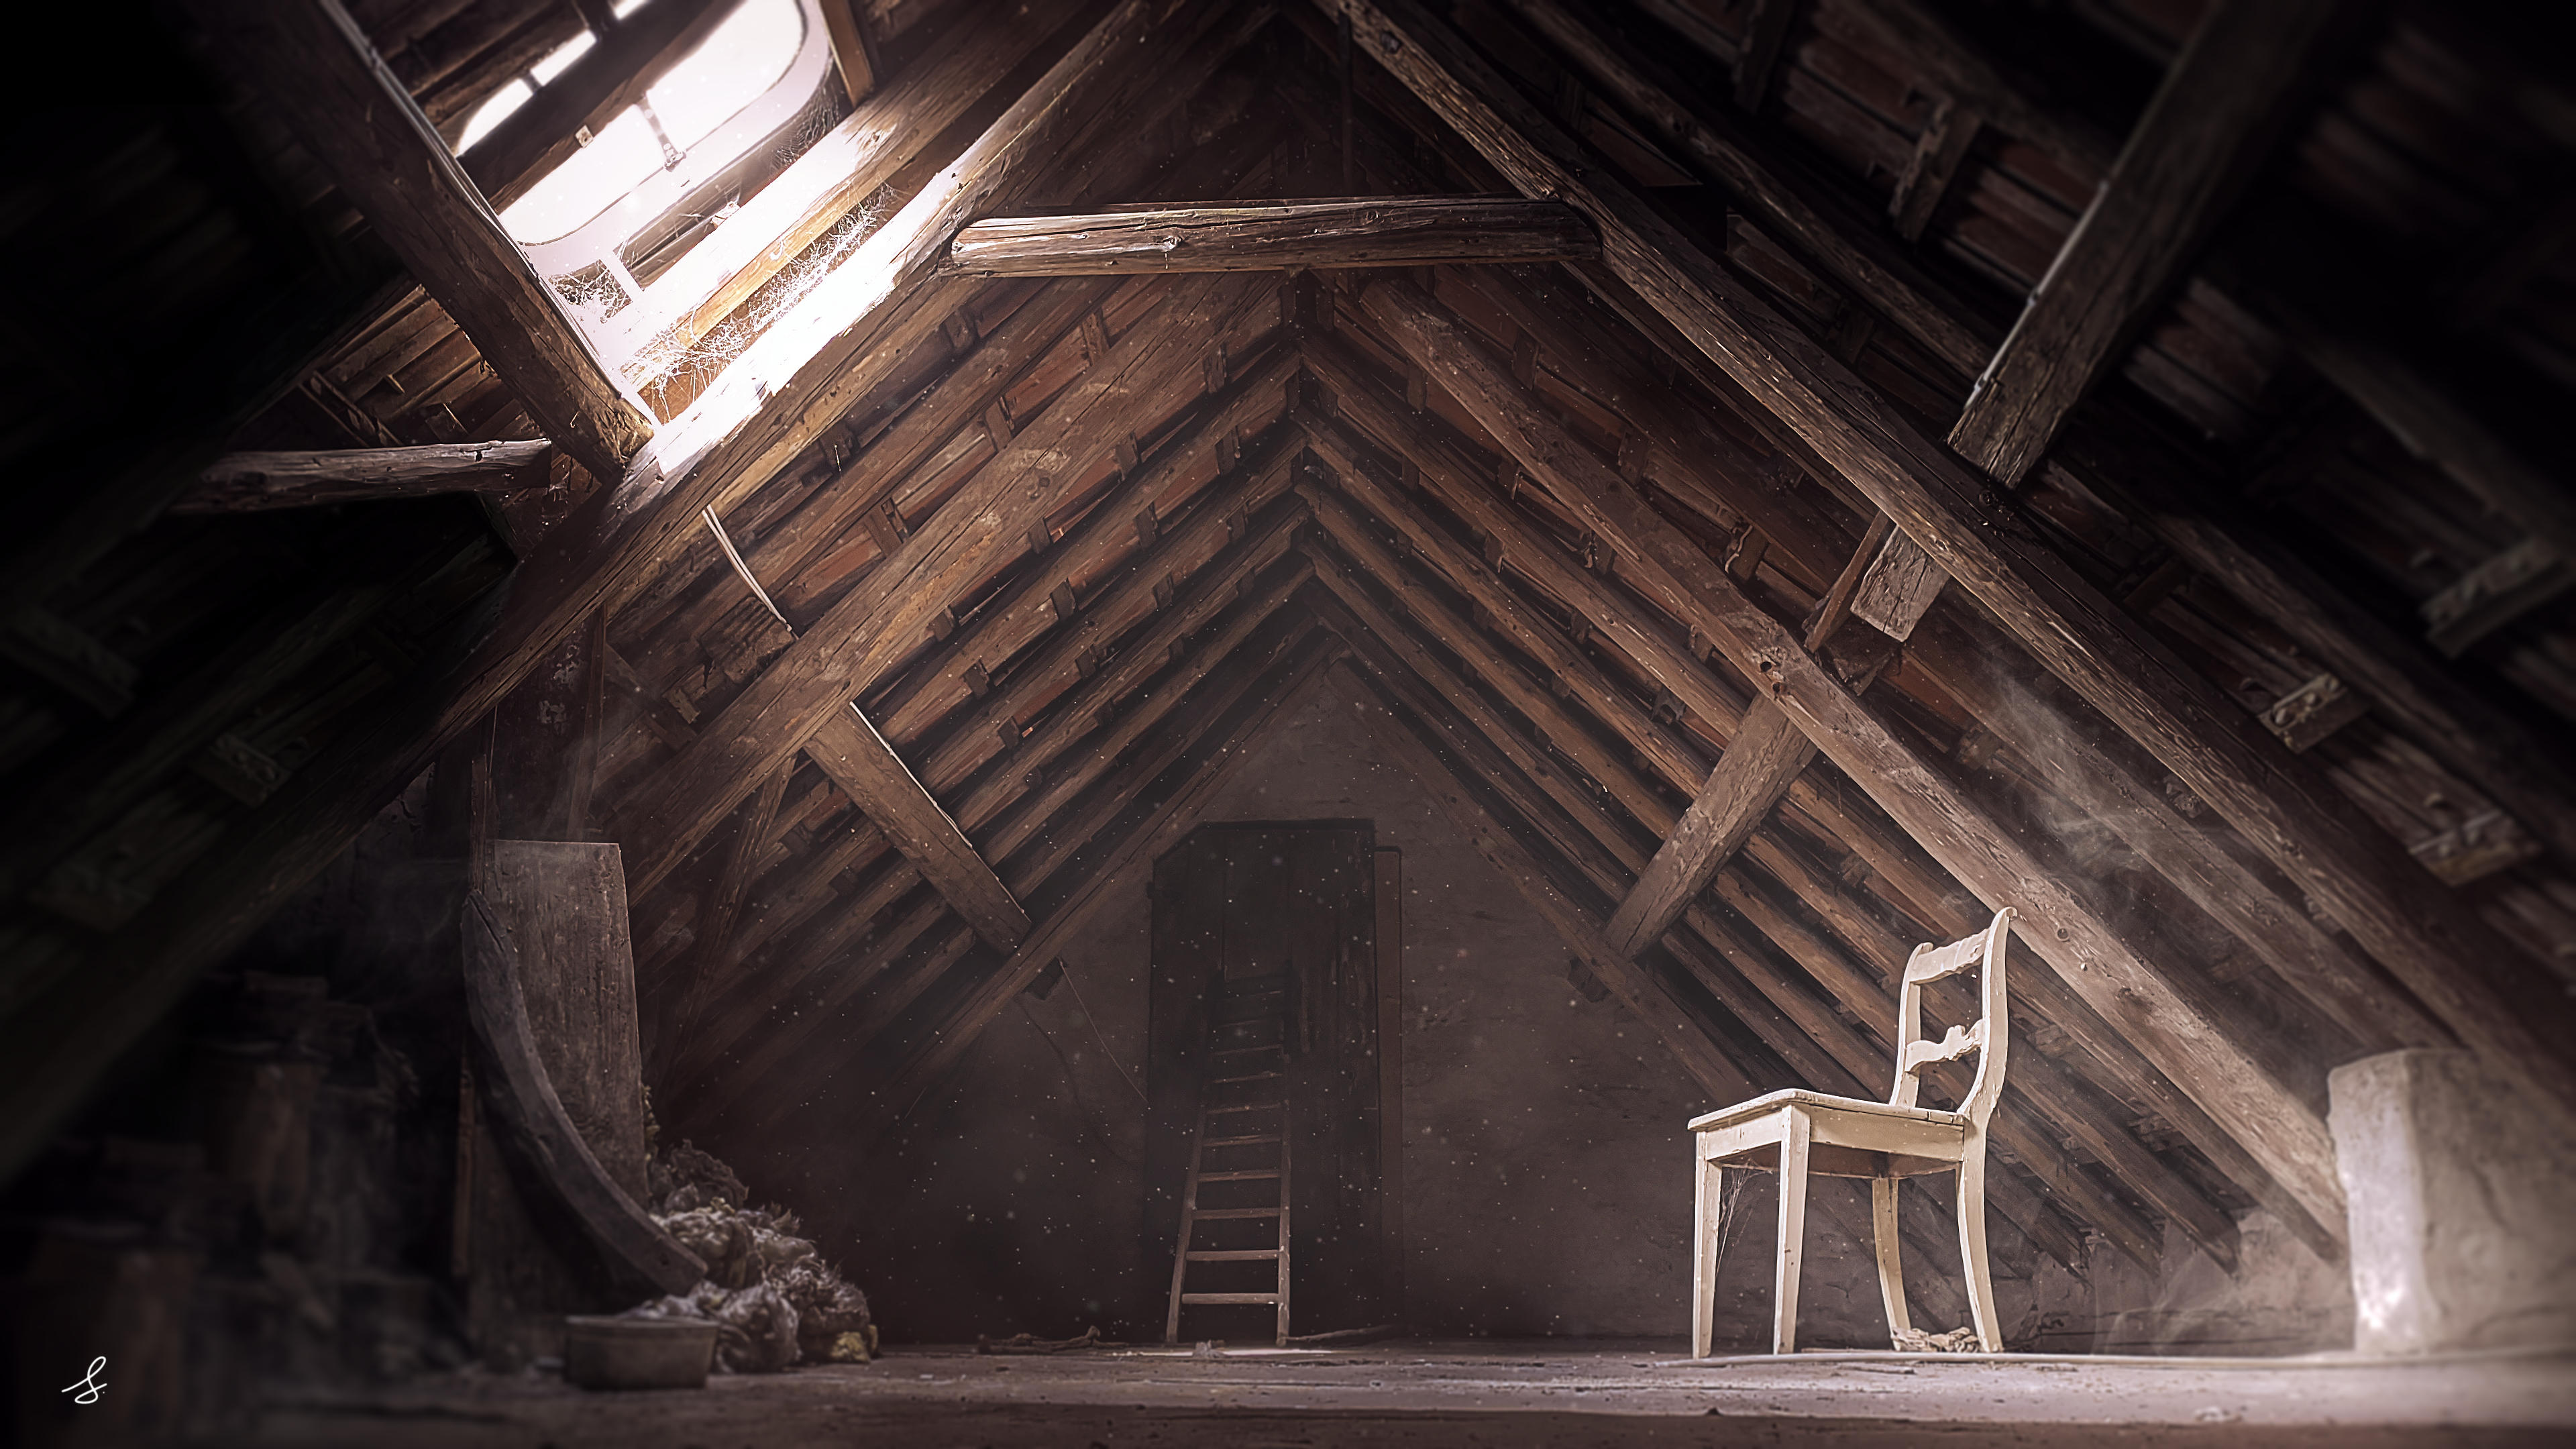 General 3840x2160 emotion ancient photography attics horror desolation isolation dust vintage wood wood house old building photoshopped light effects grunge decay hope sun rays 4K